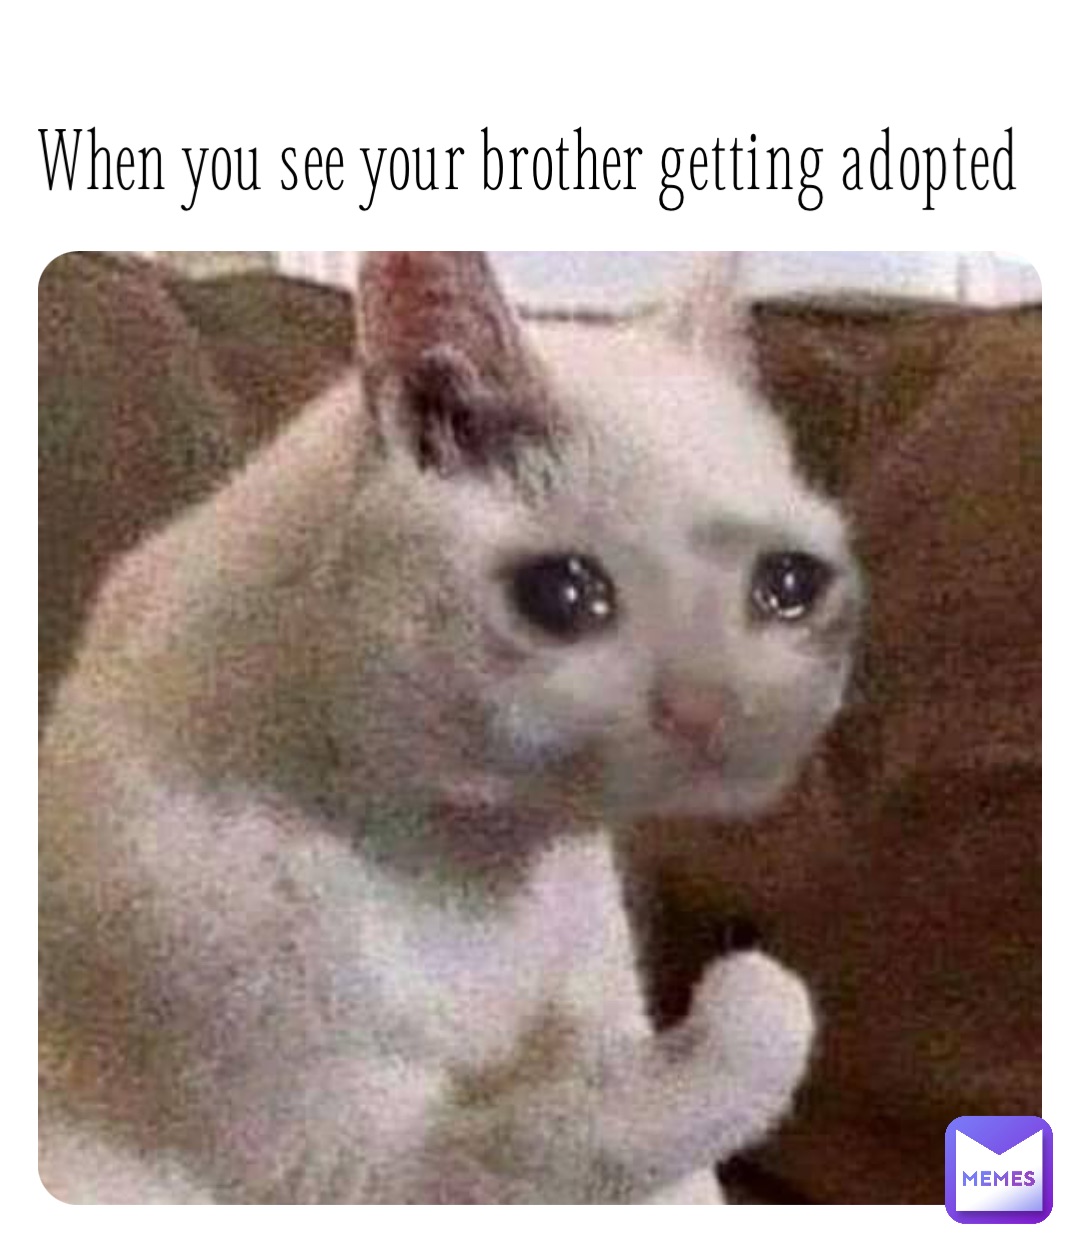 When you see your brother getting adopted